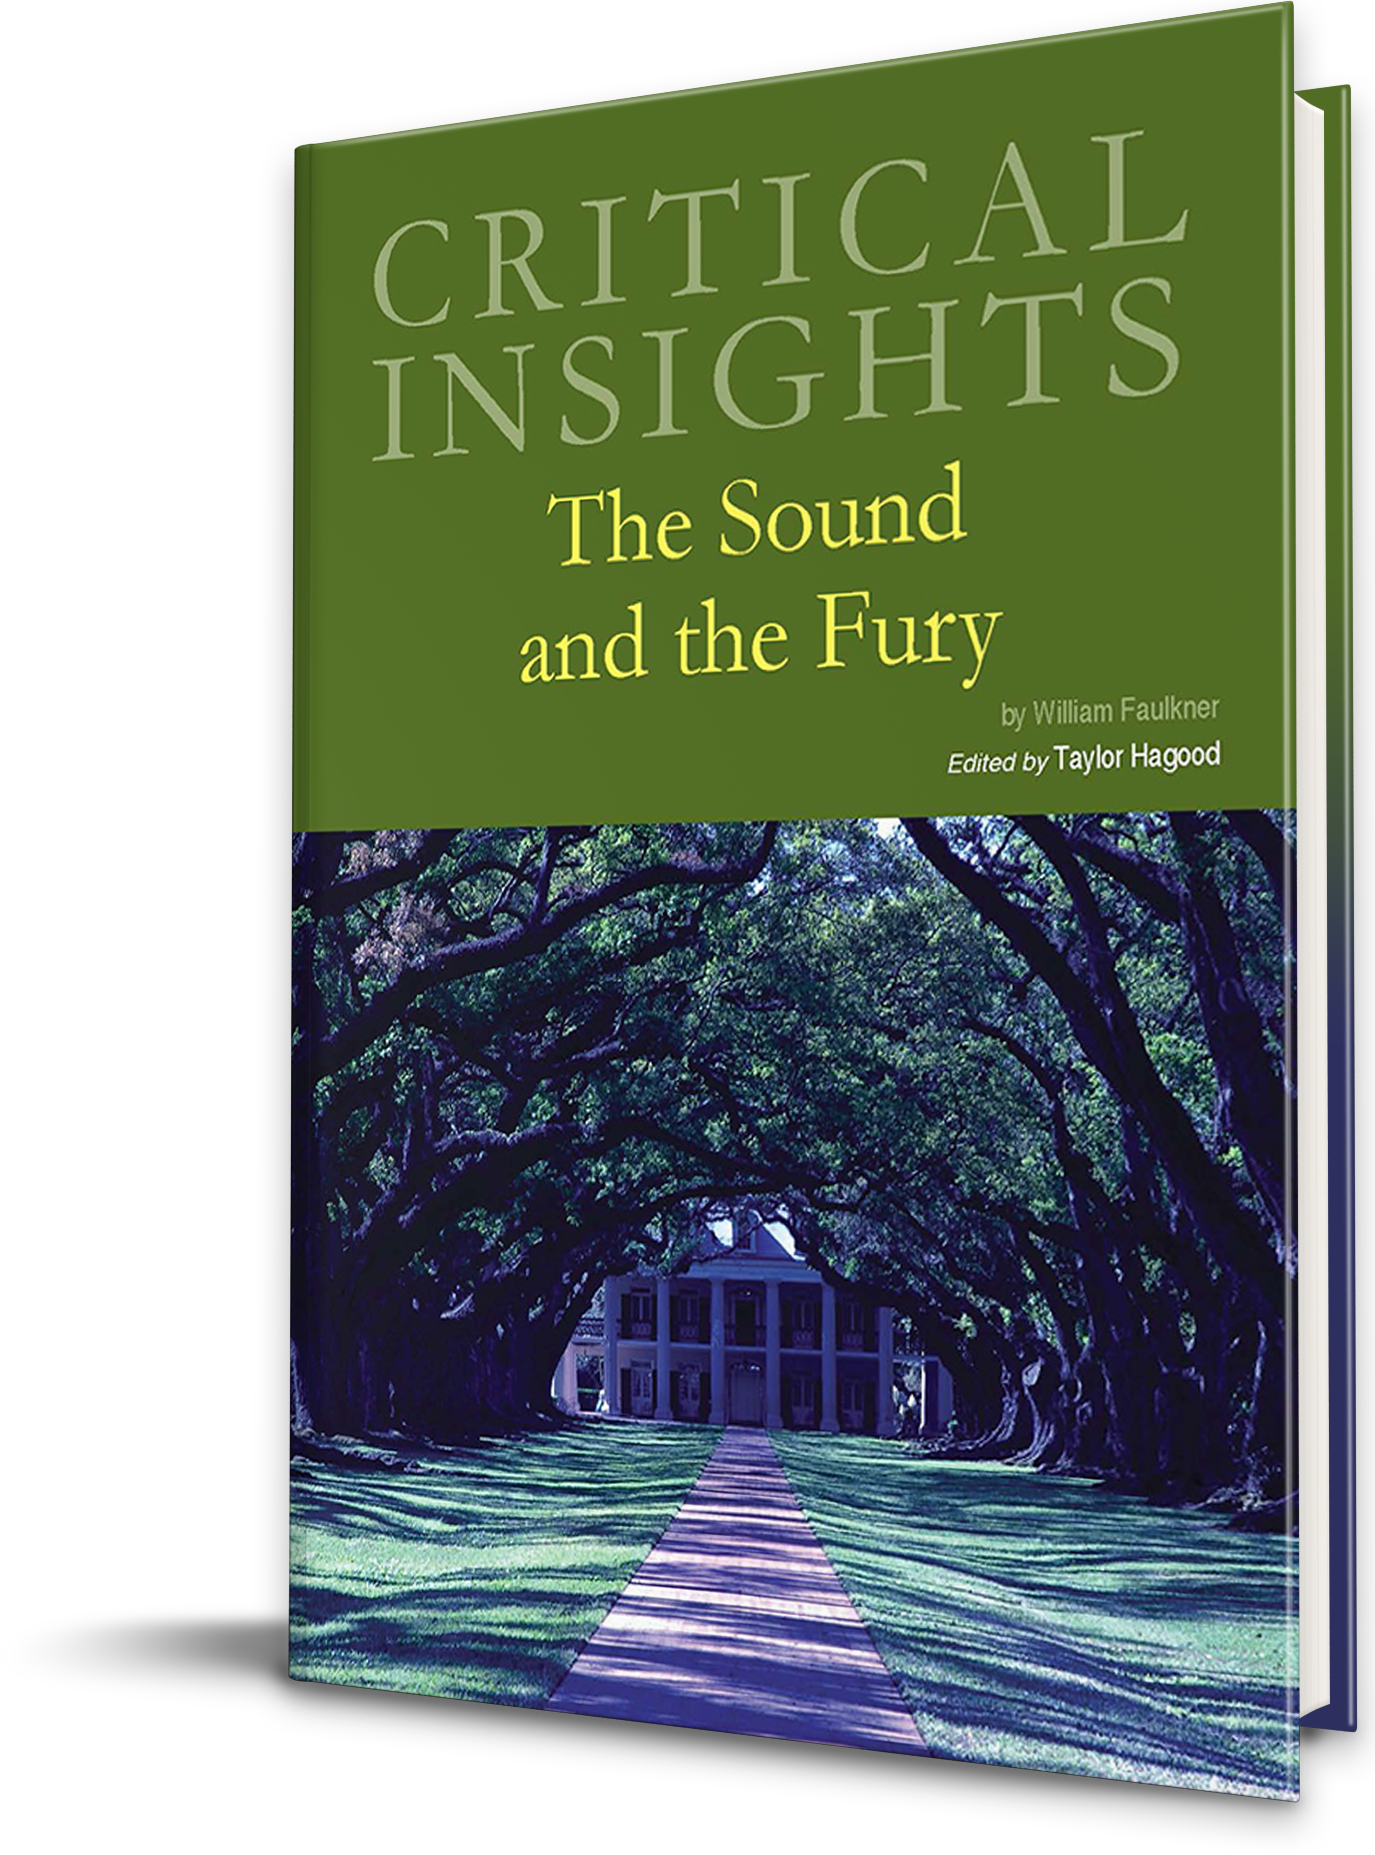 Critical Insights: The Sound and the Fury